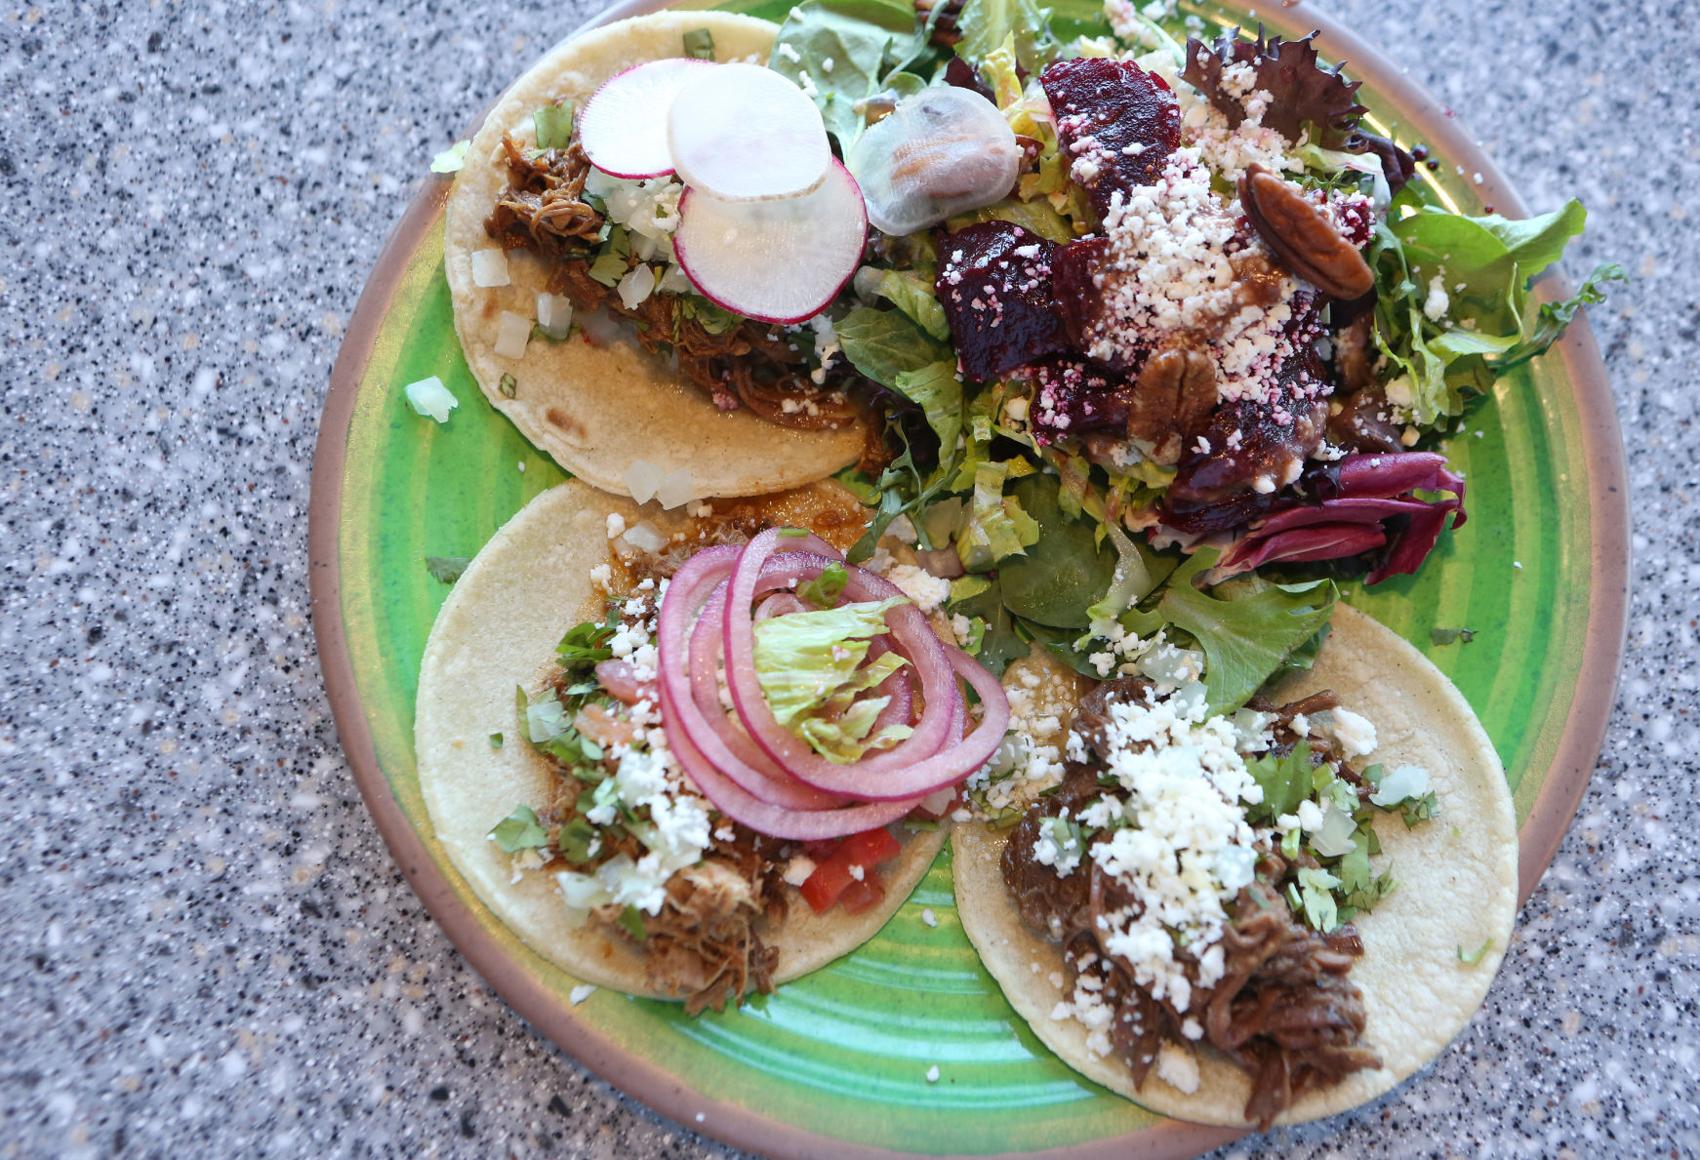 Let’s Eat: Migrants draws on tradition to offer new taco options